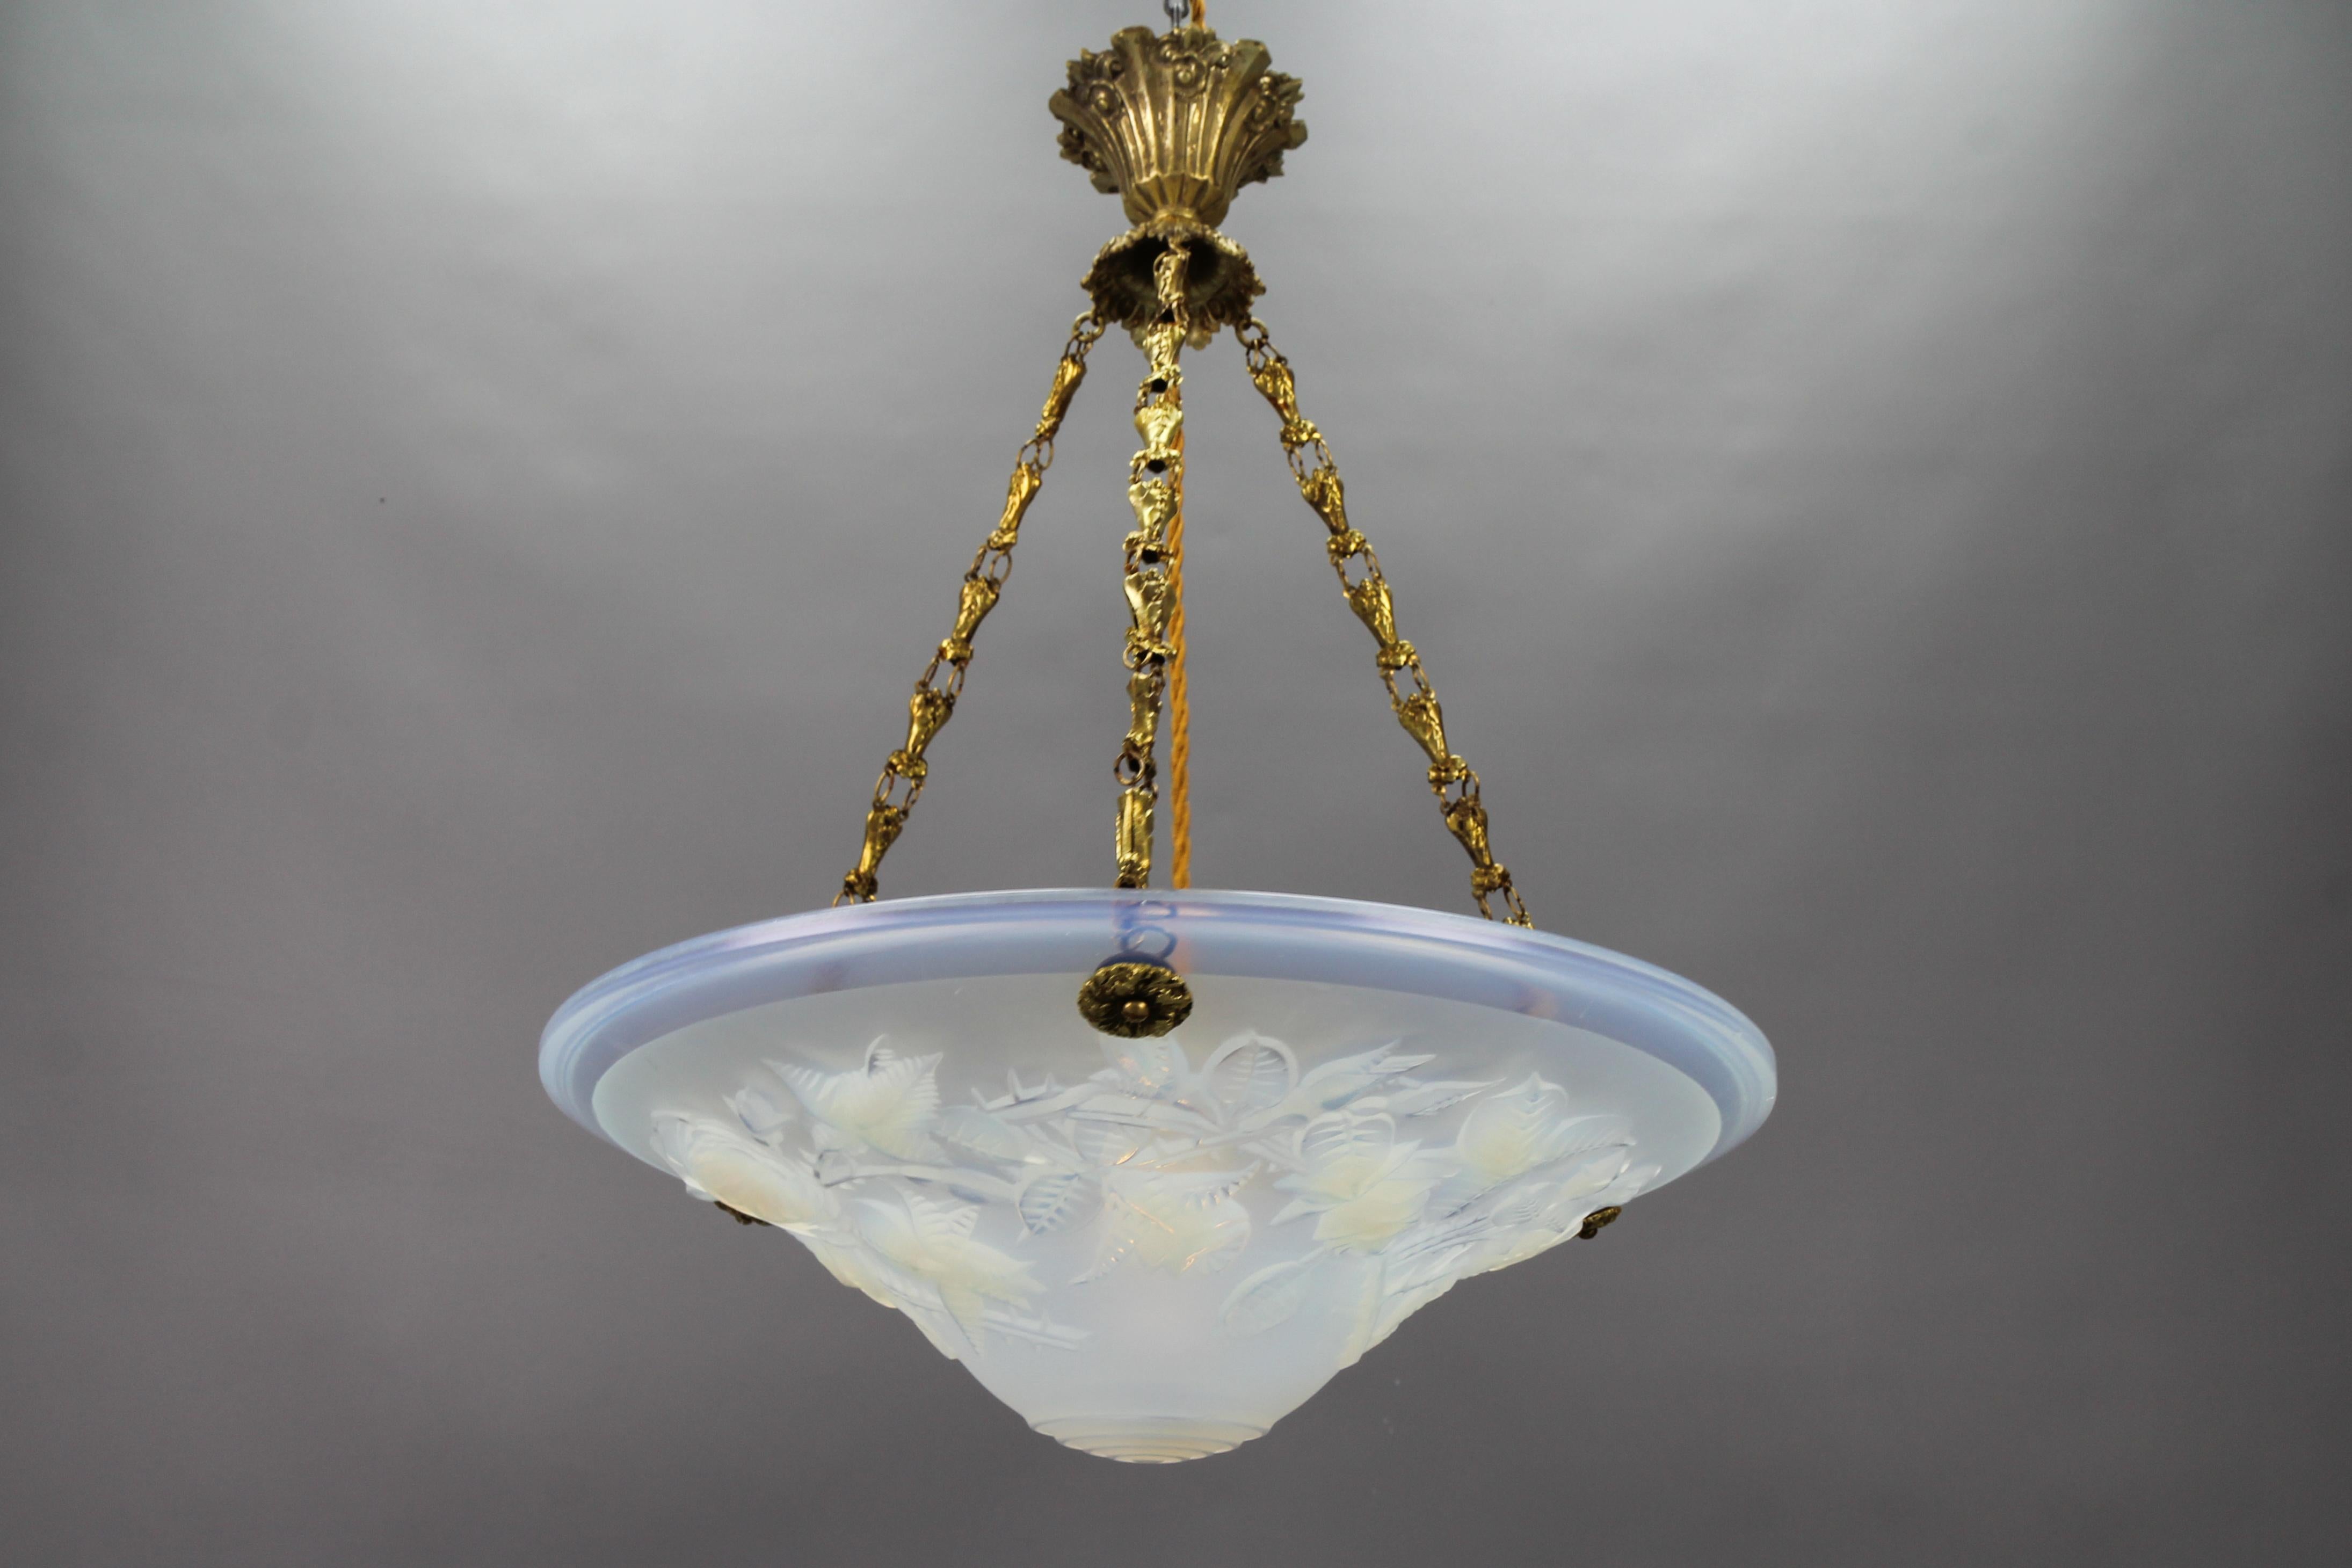 French Art Deco Opalescent Glass Pendant Light Roses by Pierre Maynadier, circa the 1920s.
A beautiful French Art Deco pendant light made of adorable opalescent glass with a floral design – intricately detailed roses, leaves, and rosebuds. The